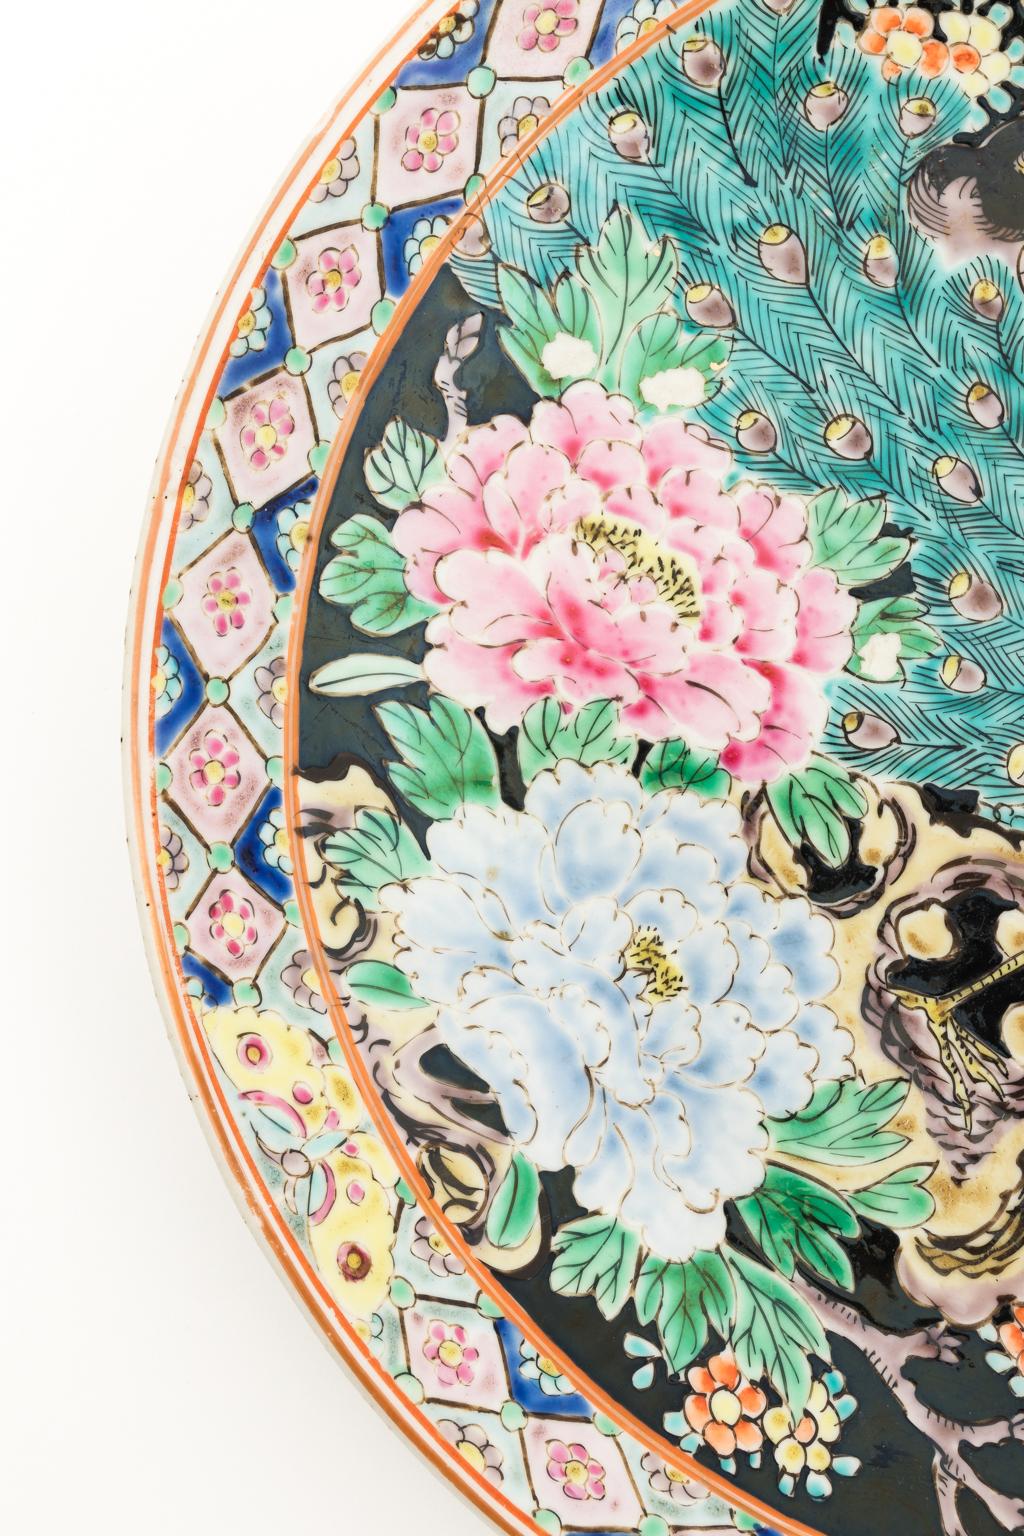 Vintage oriental charger. Depicted birds of paradise with vibrant flowers and ferns. Hand-painted.
 